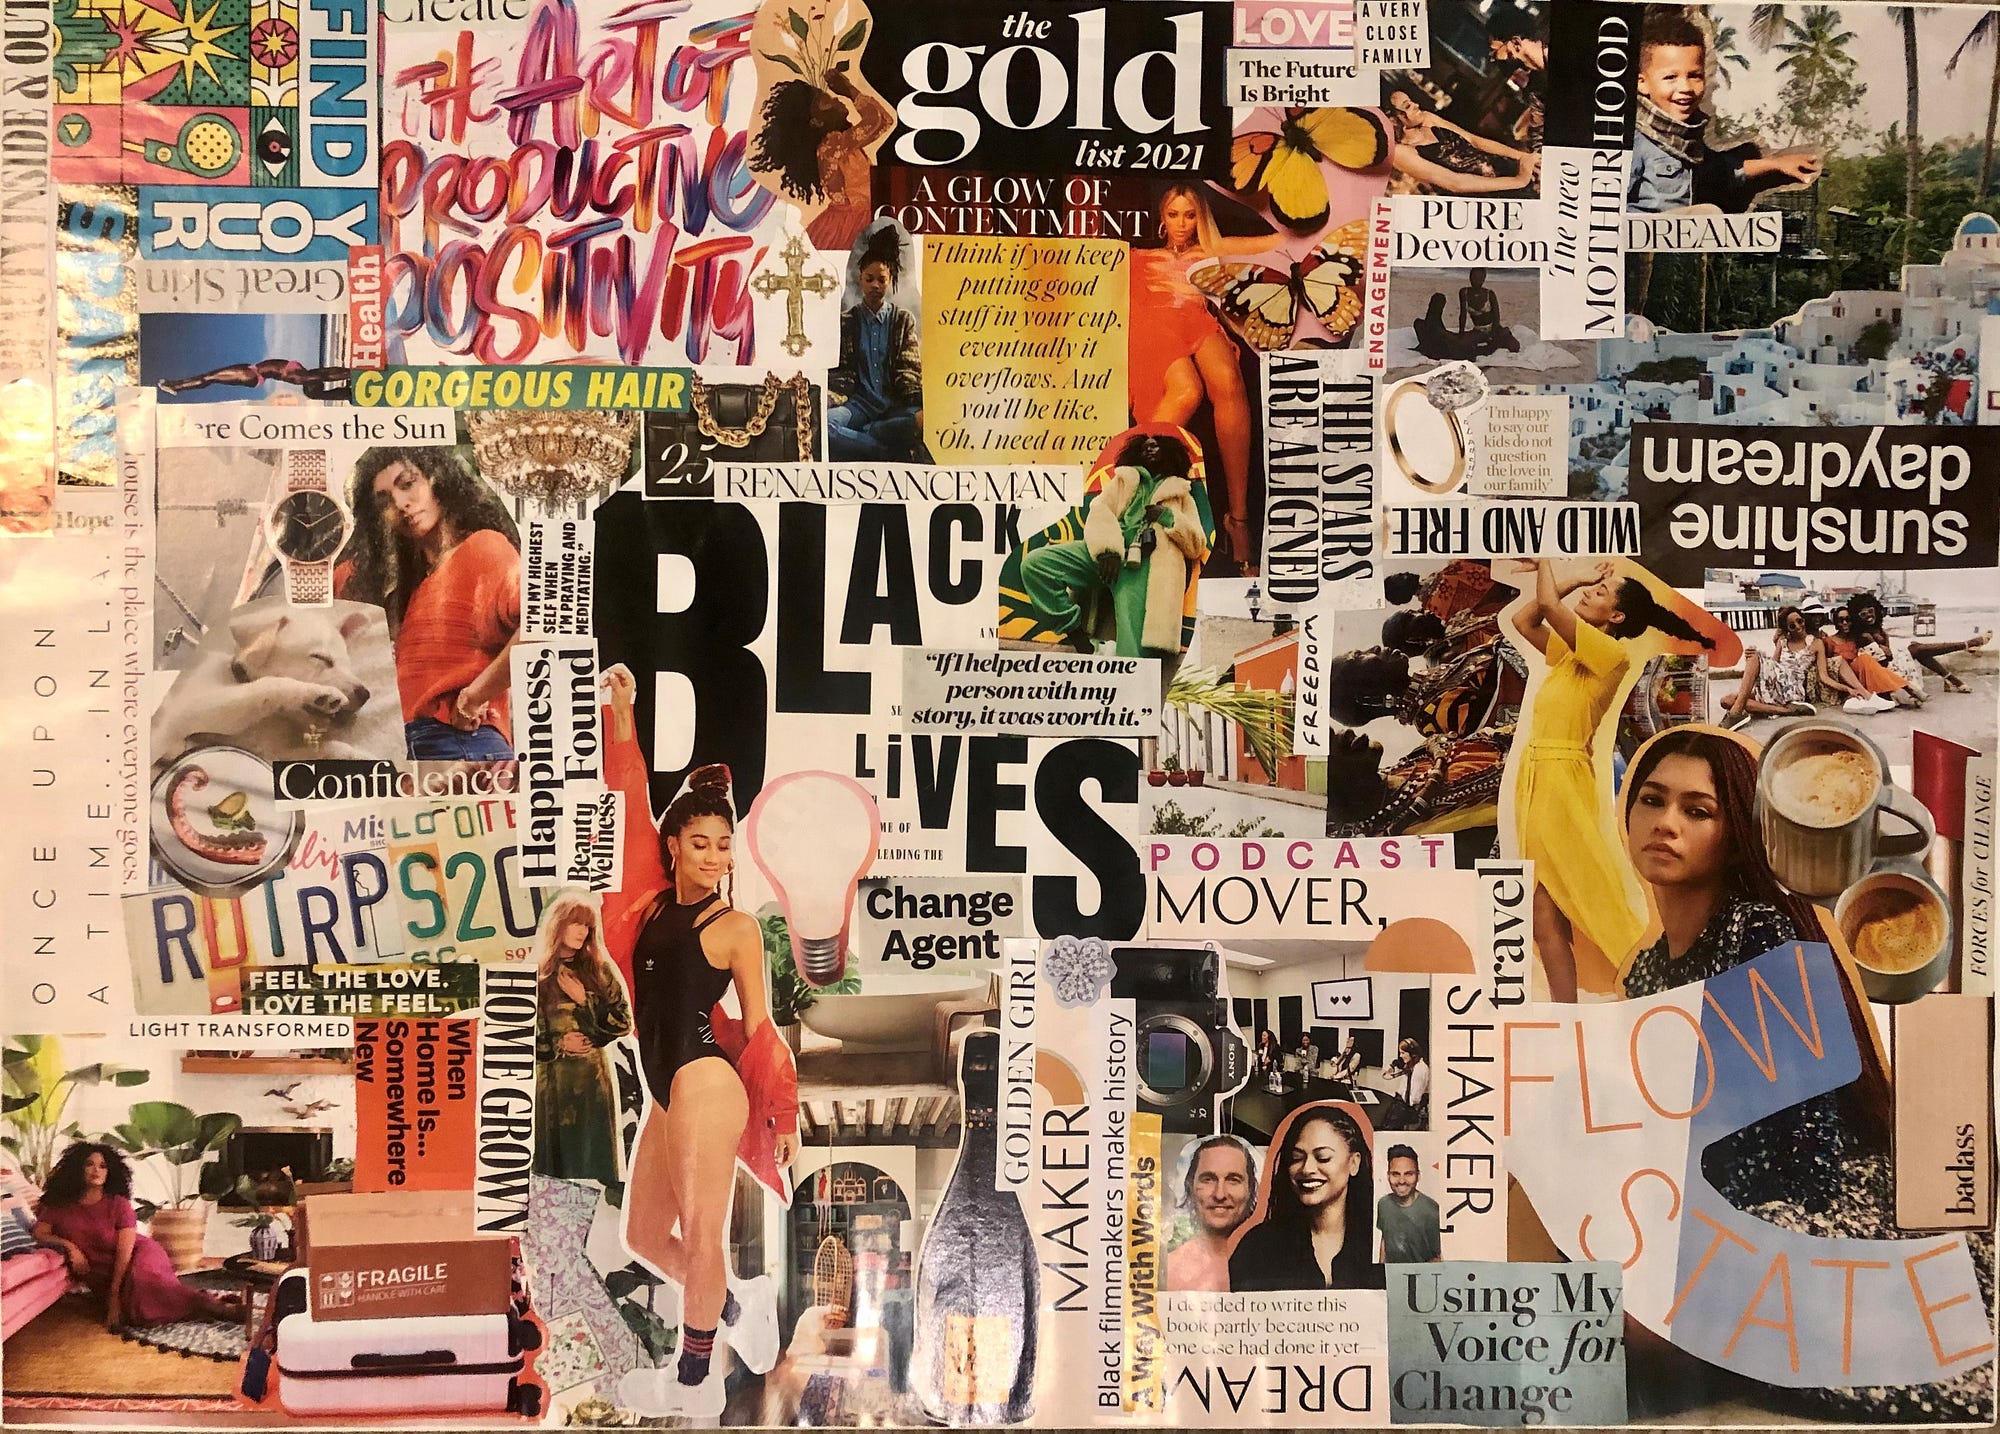 How to Create a Fool-Proof 2021 Vision Board, by Simone Keelah Brathwaite, Curious